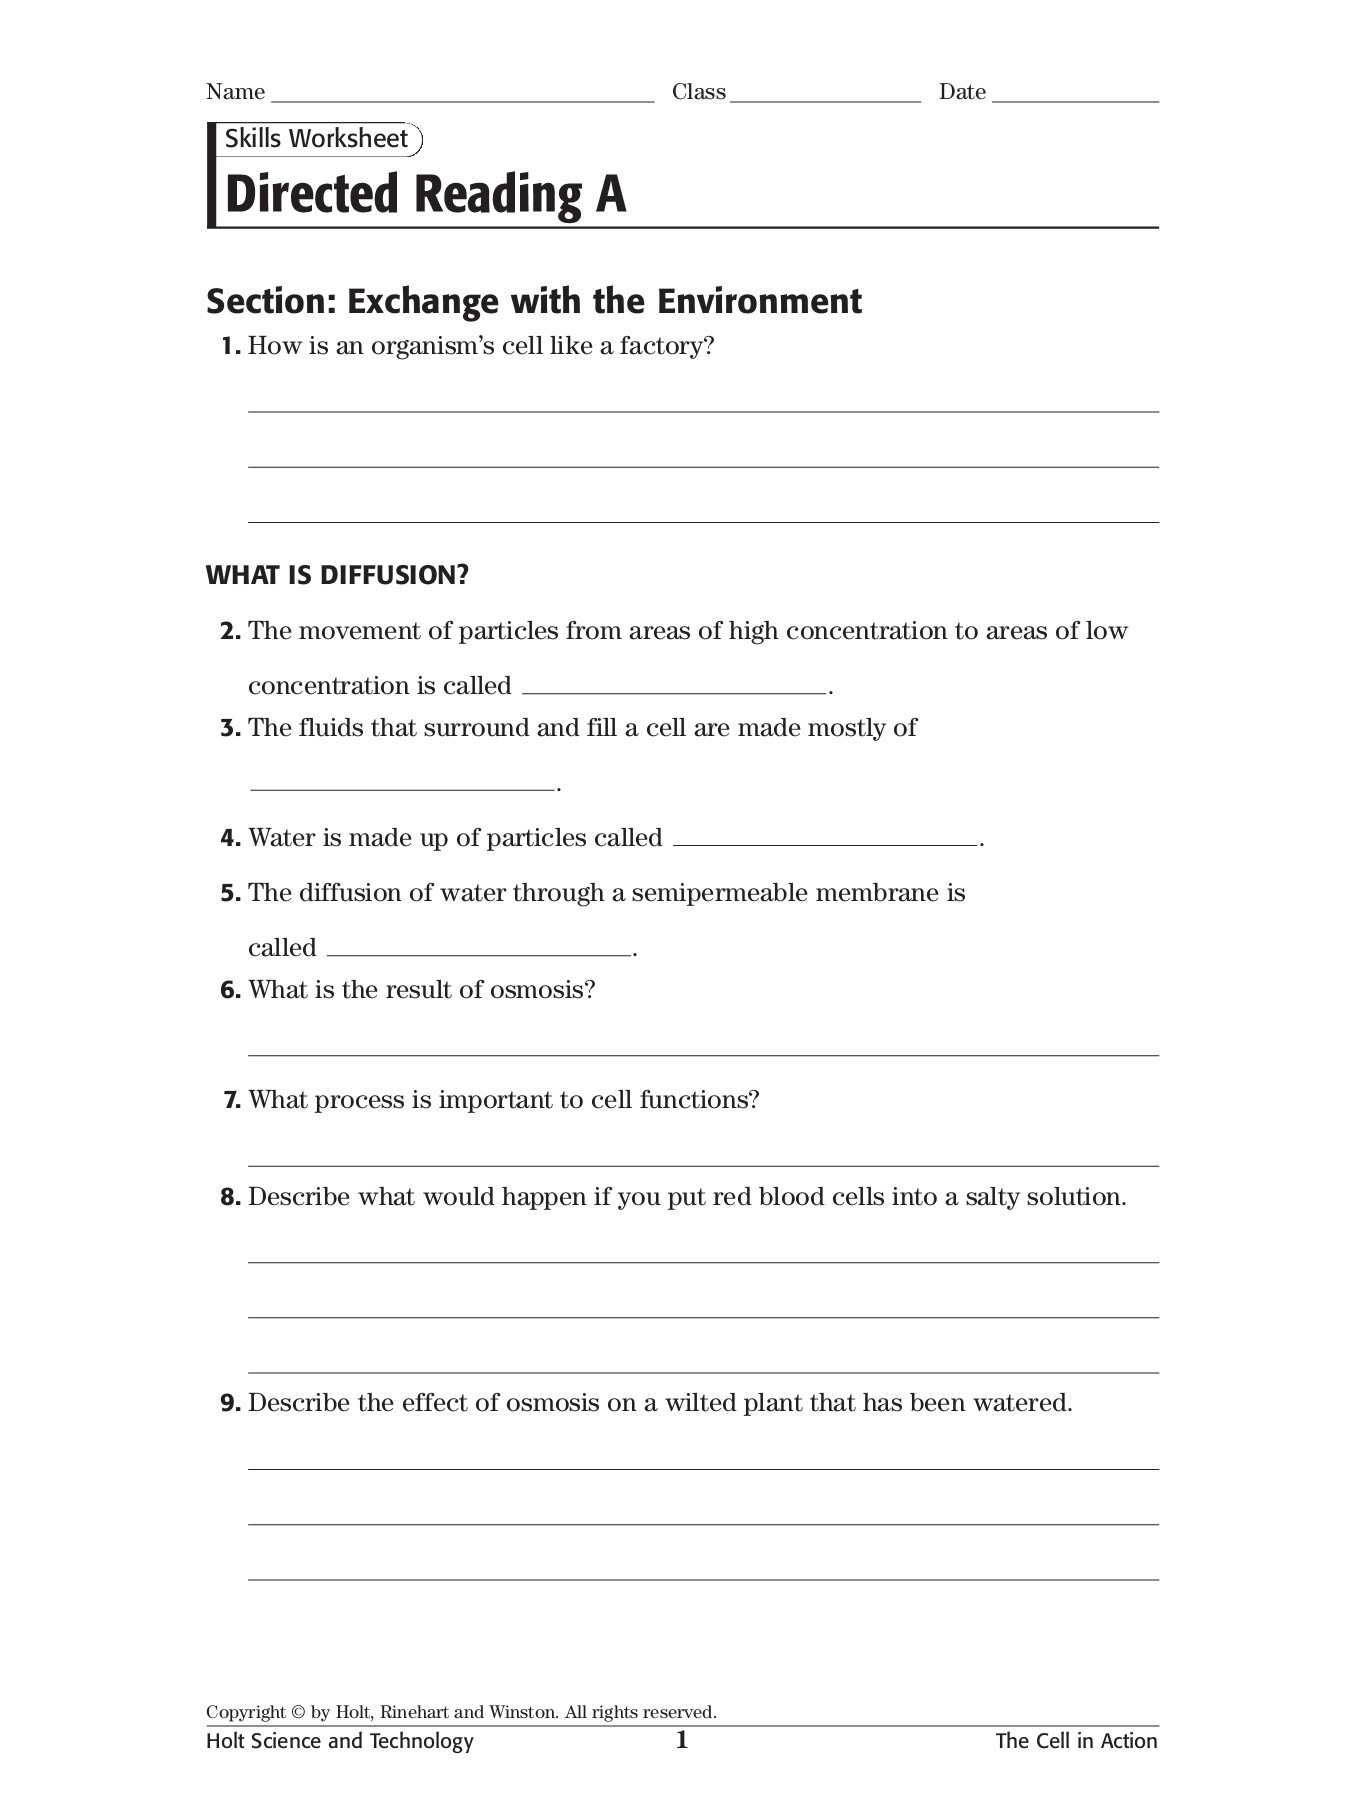 skills-worksheet-directed-reading-a-answer-key-db-excel